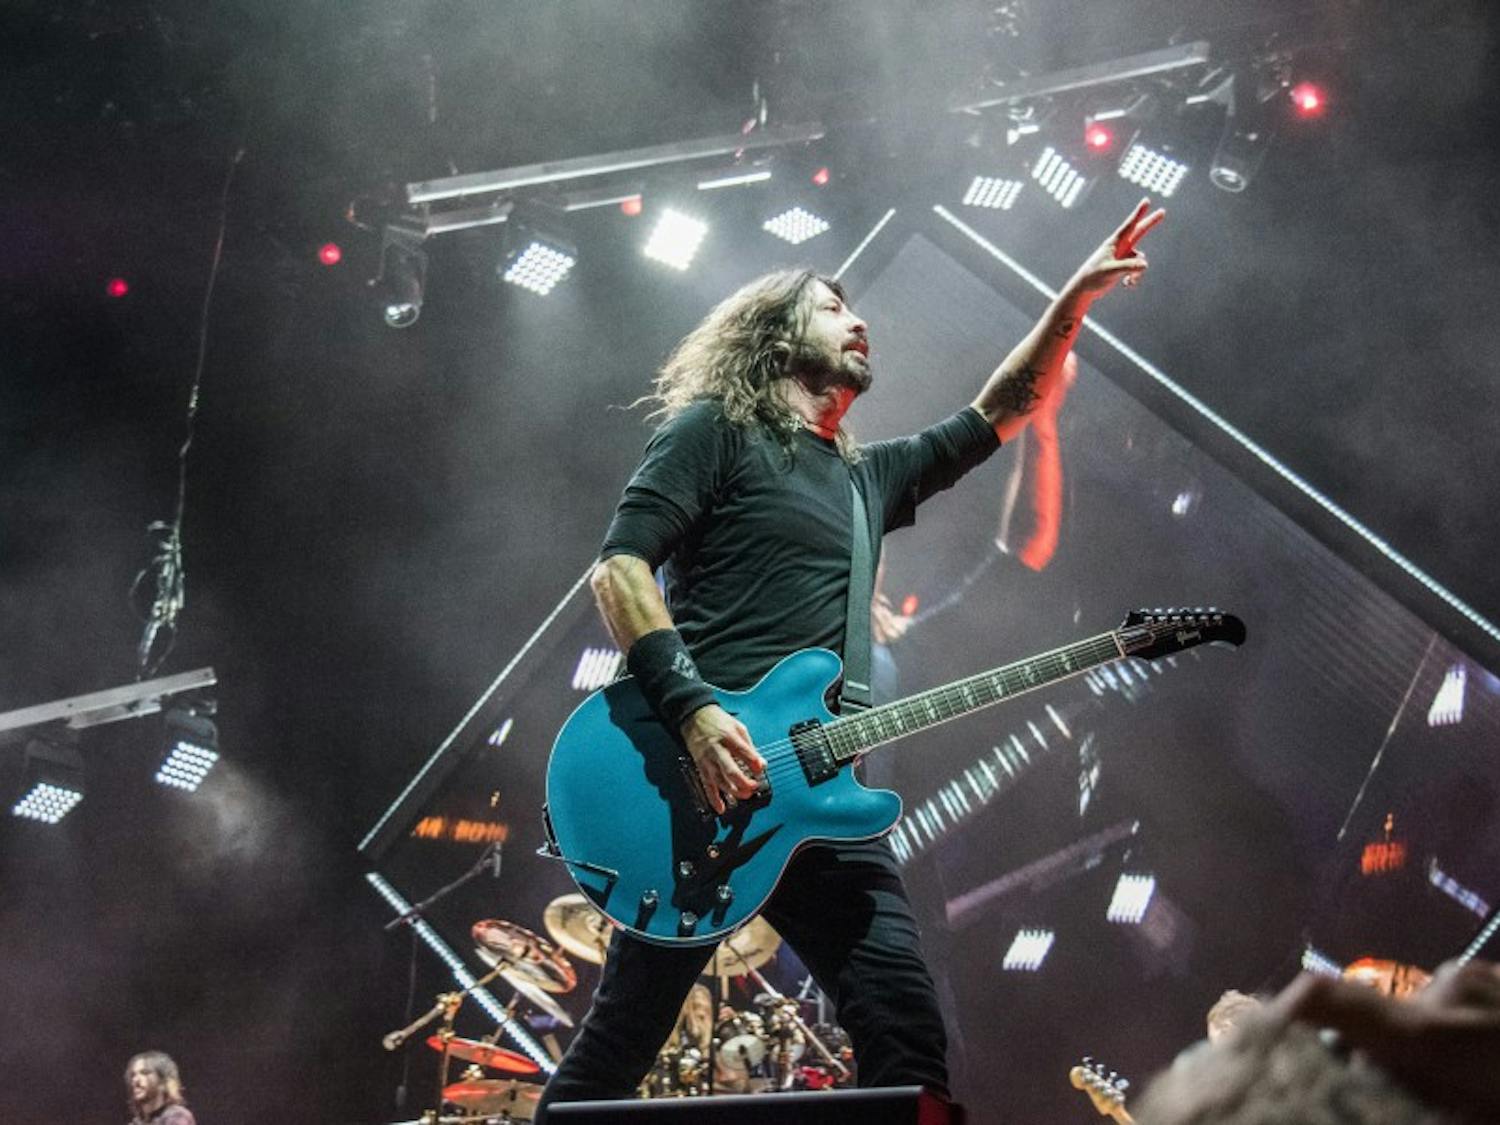 Lead singer of Foo Fighters,&nbsp;Dave Grohl, delivered an impressive performance at the Kohl Center on Tuesday.